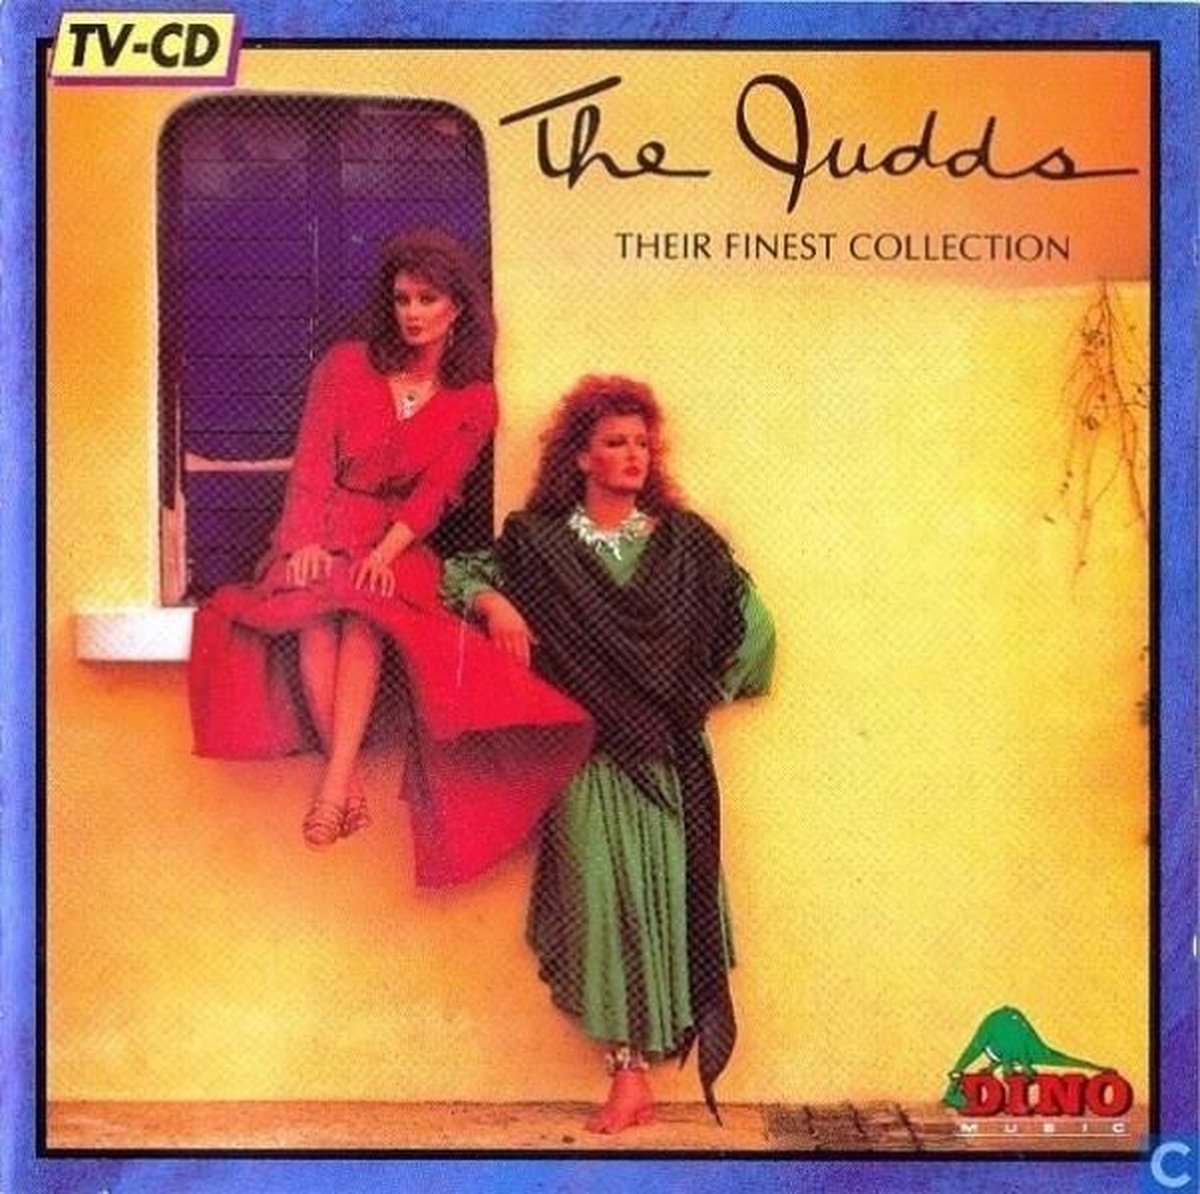 Their Finest Collection - The Judds